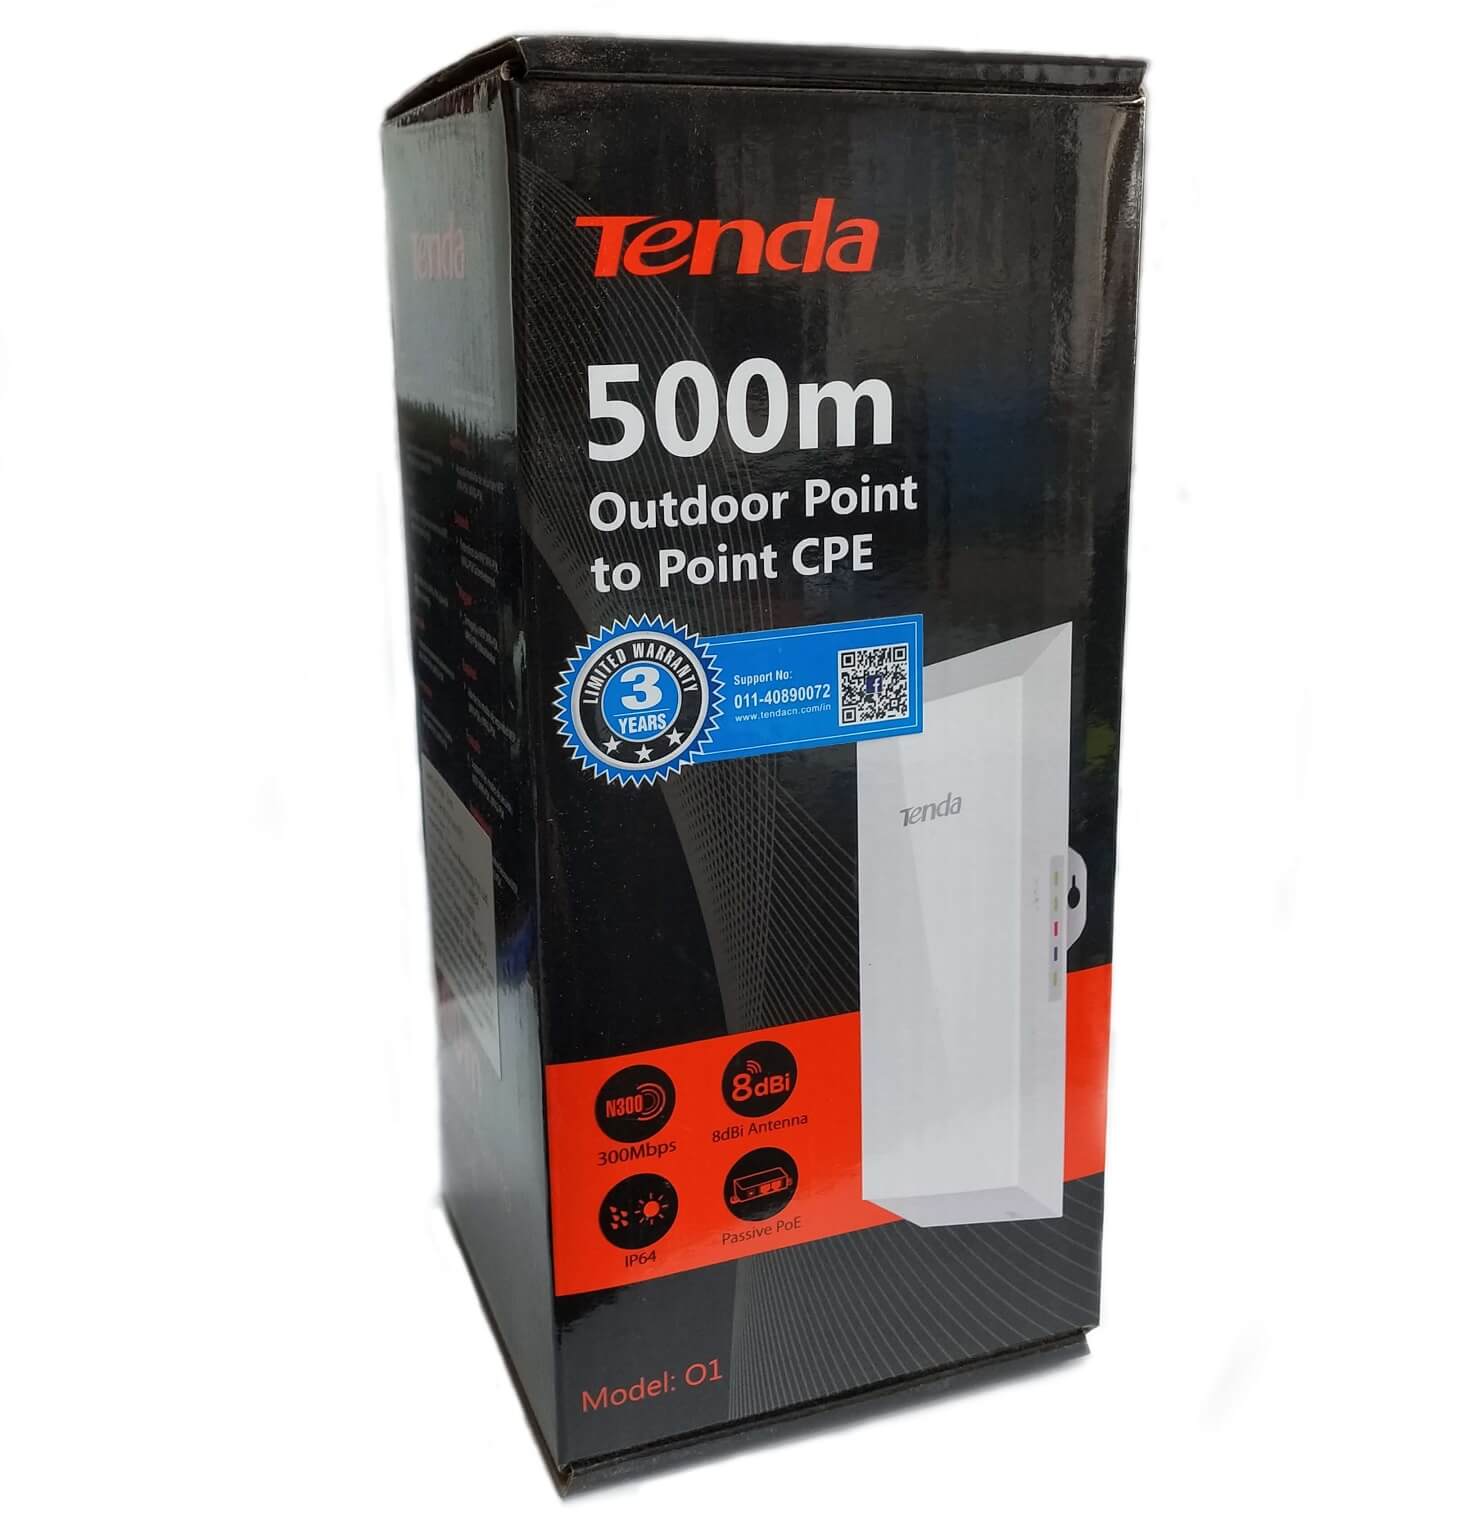 TENDA OUTDOOR POINT TO POINT O1 500MTR